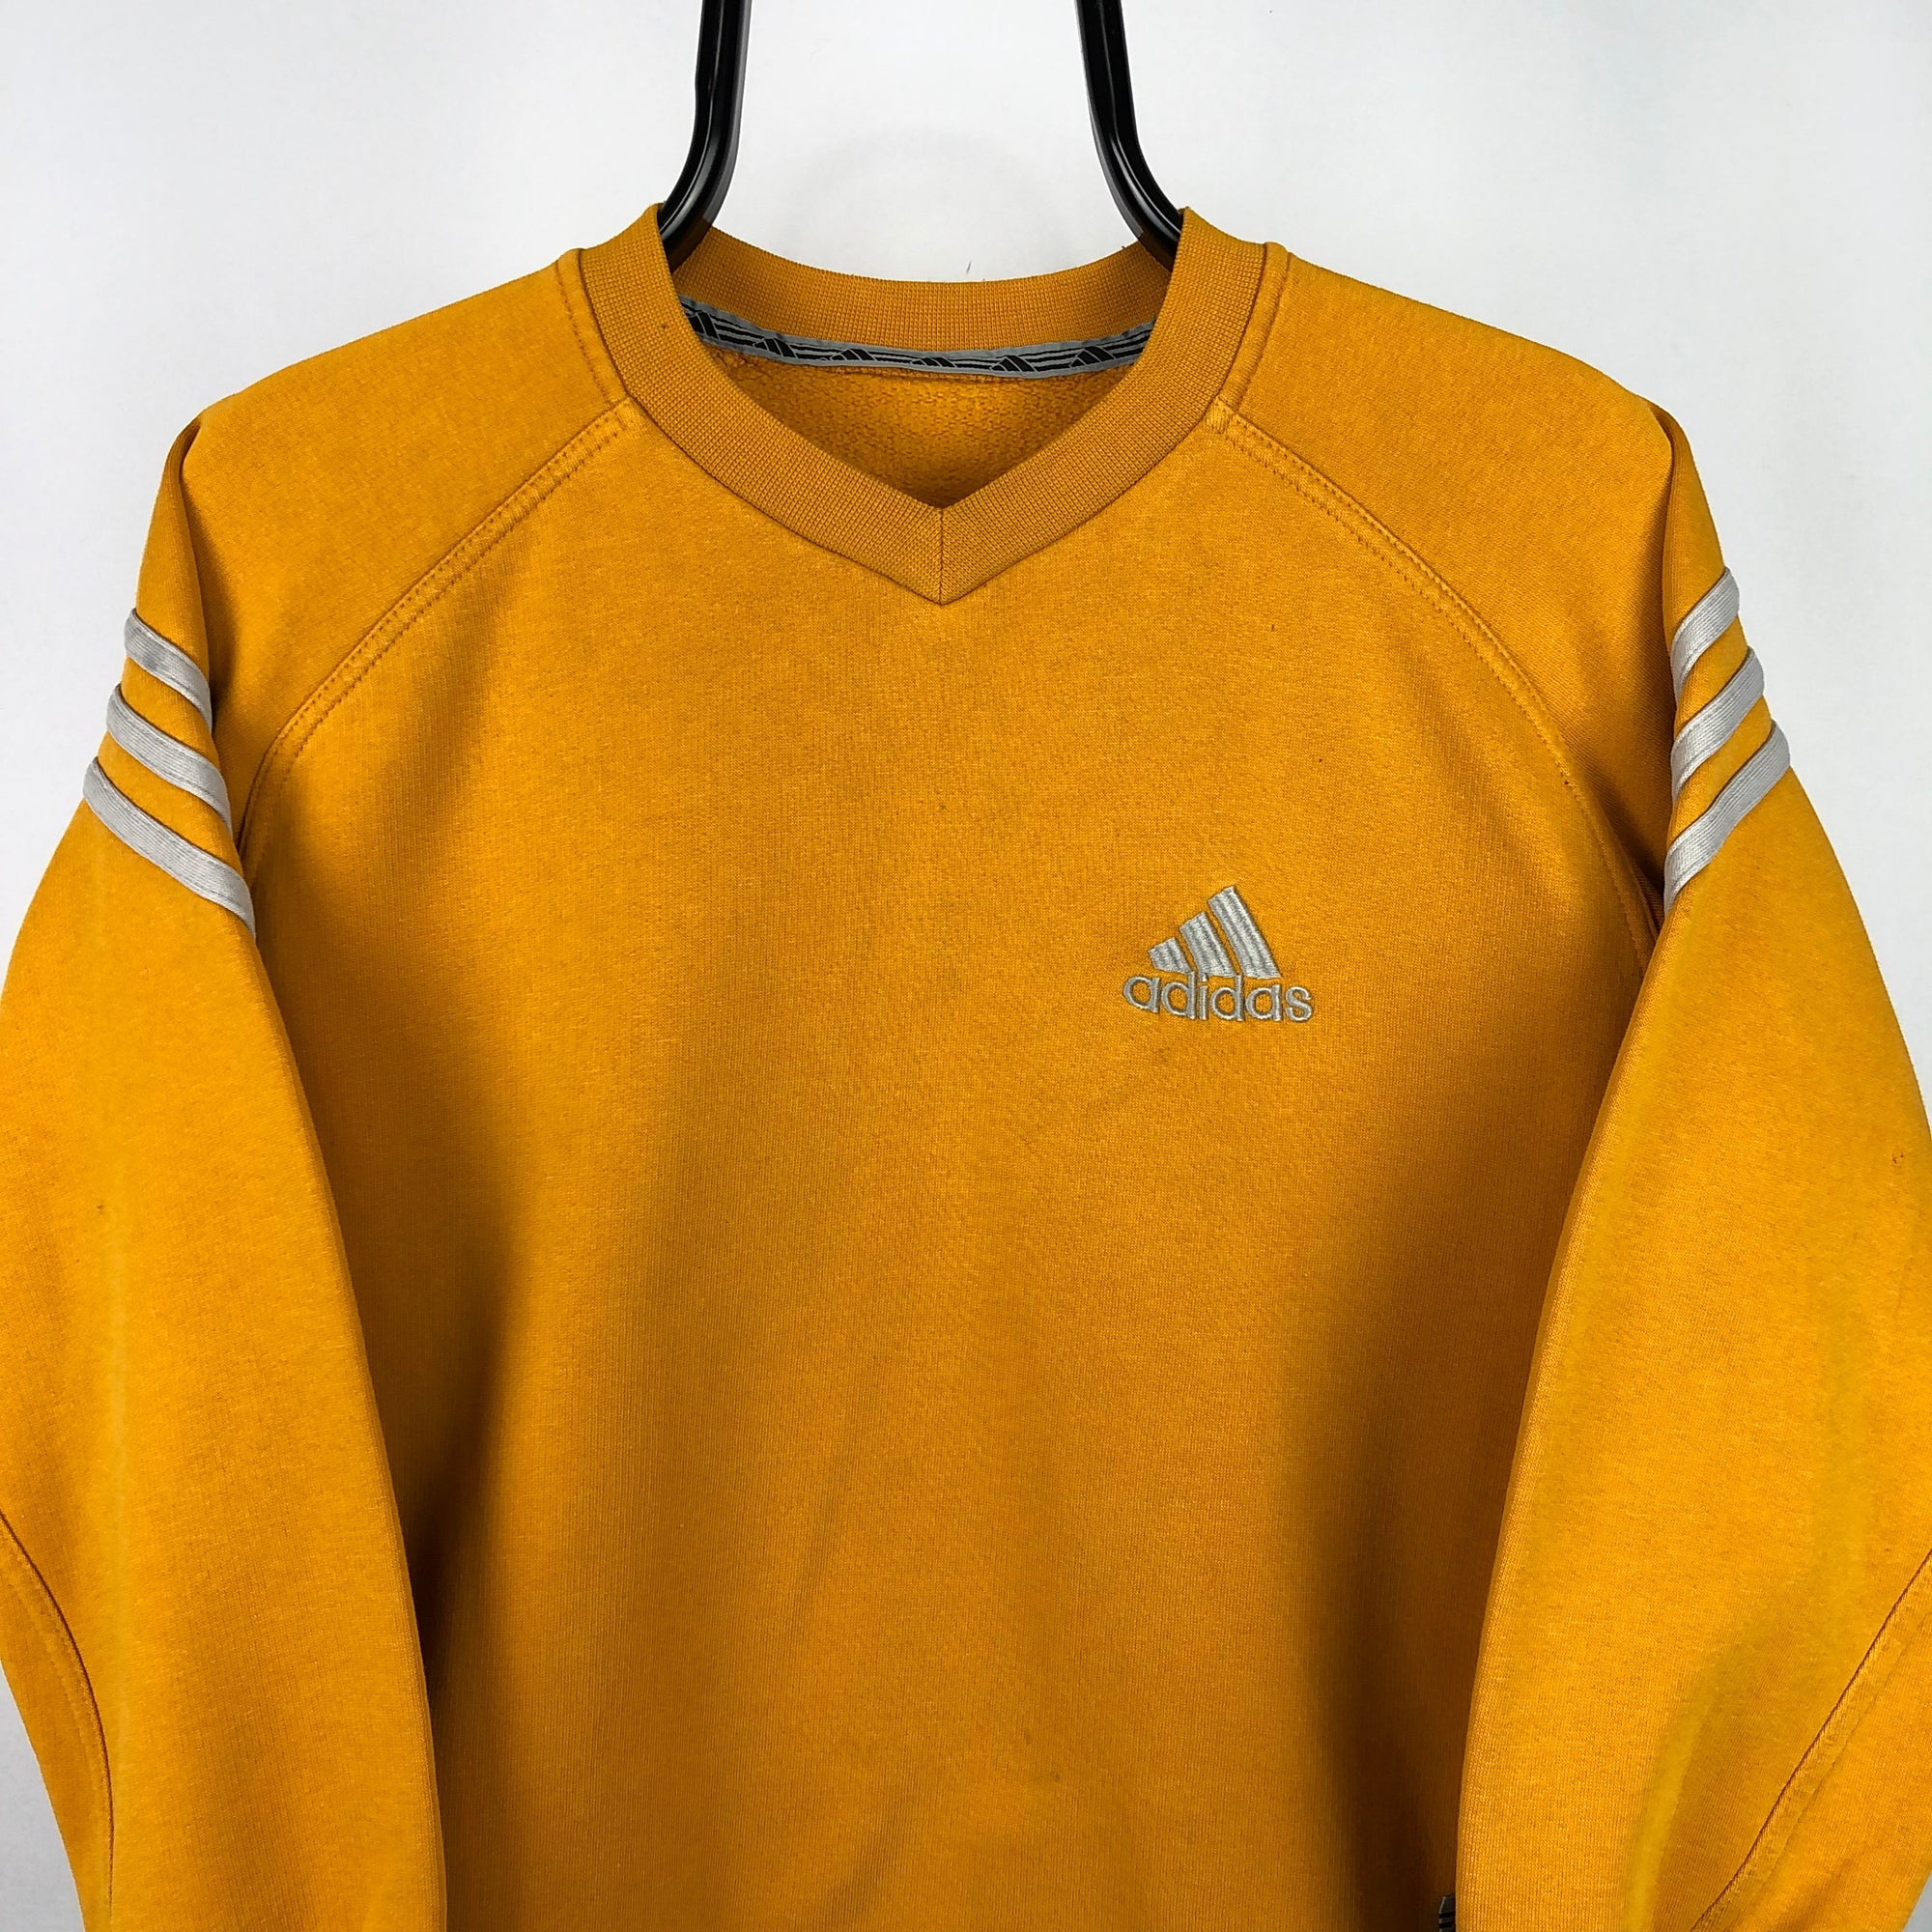 Vintage 90s Adidas Embroidered Small Logo Sweatshirt in Yellow/White - Men's XS/Women's Small